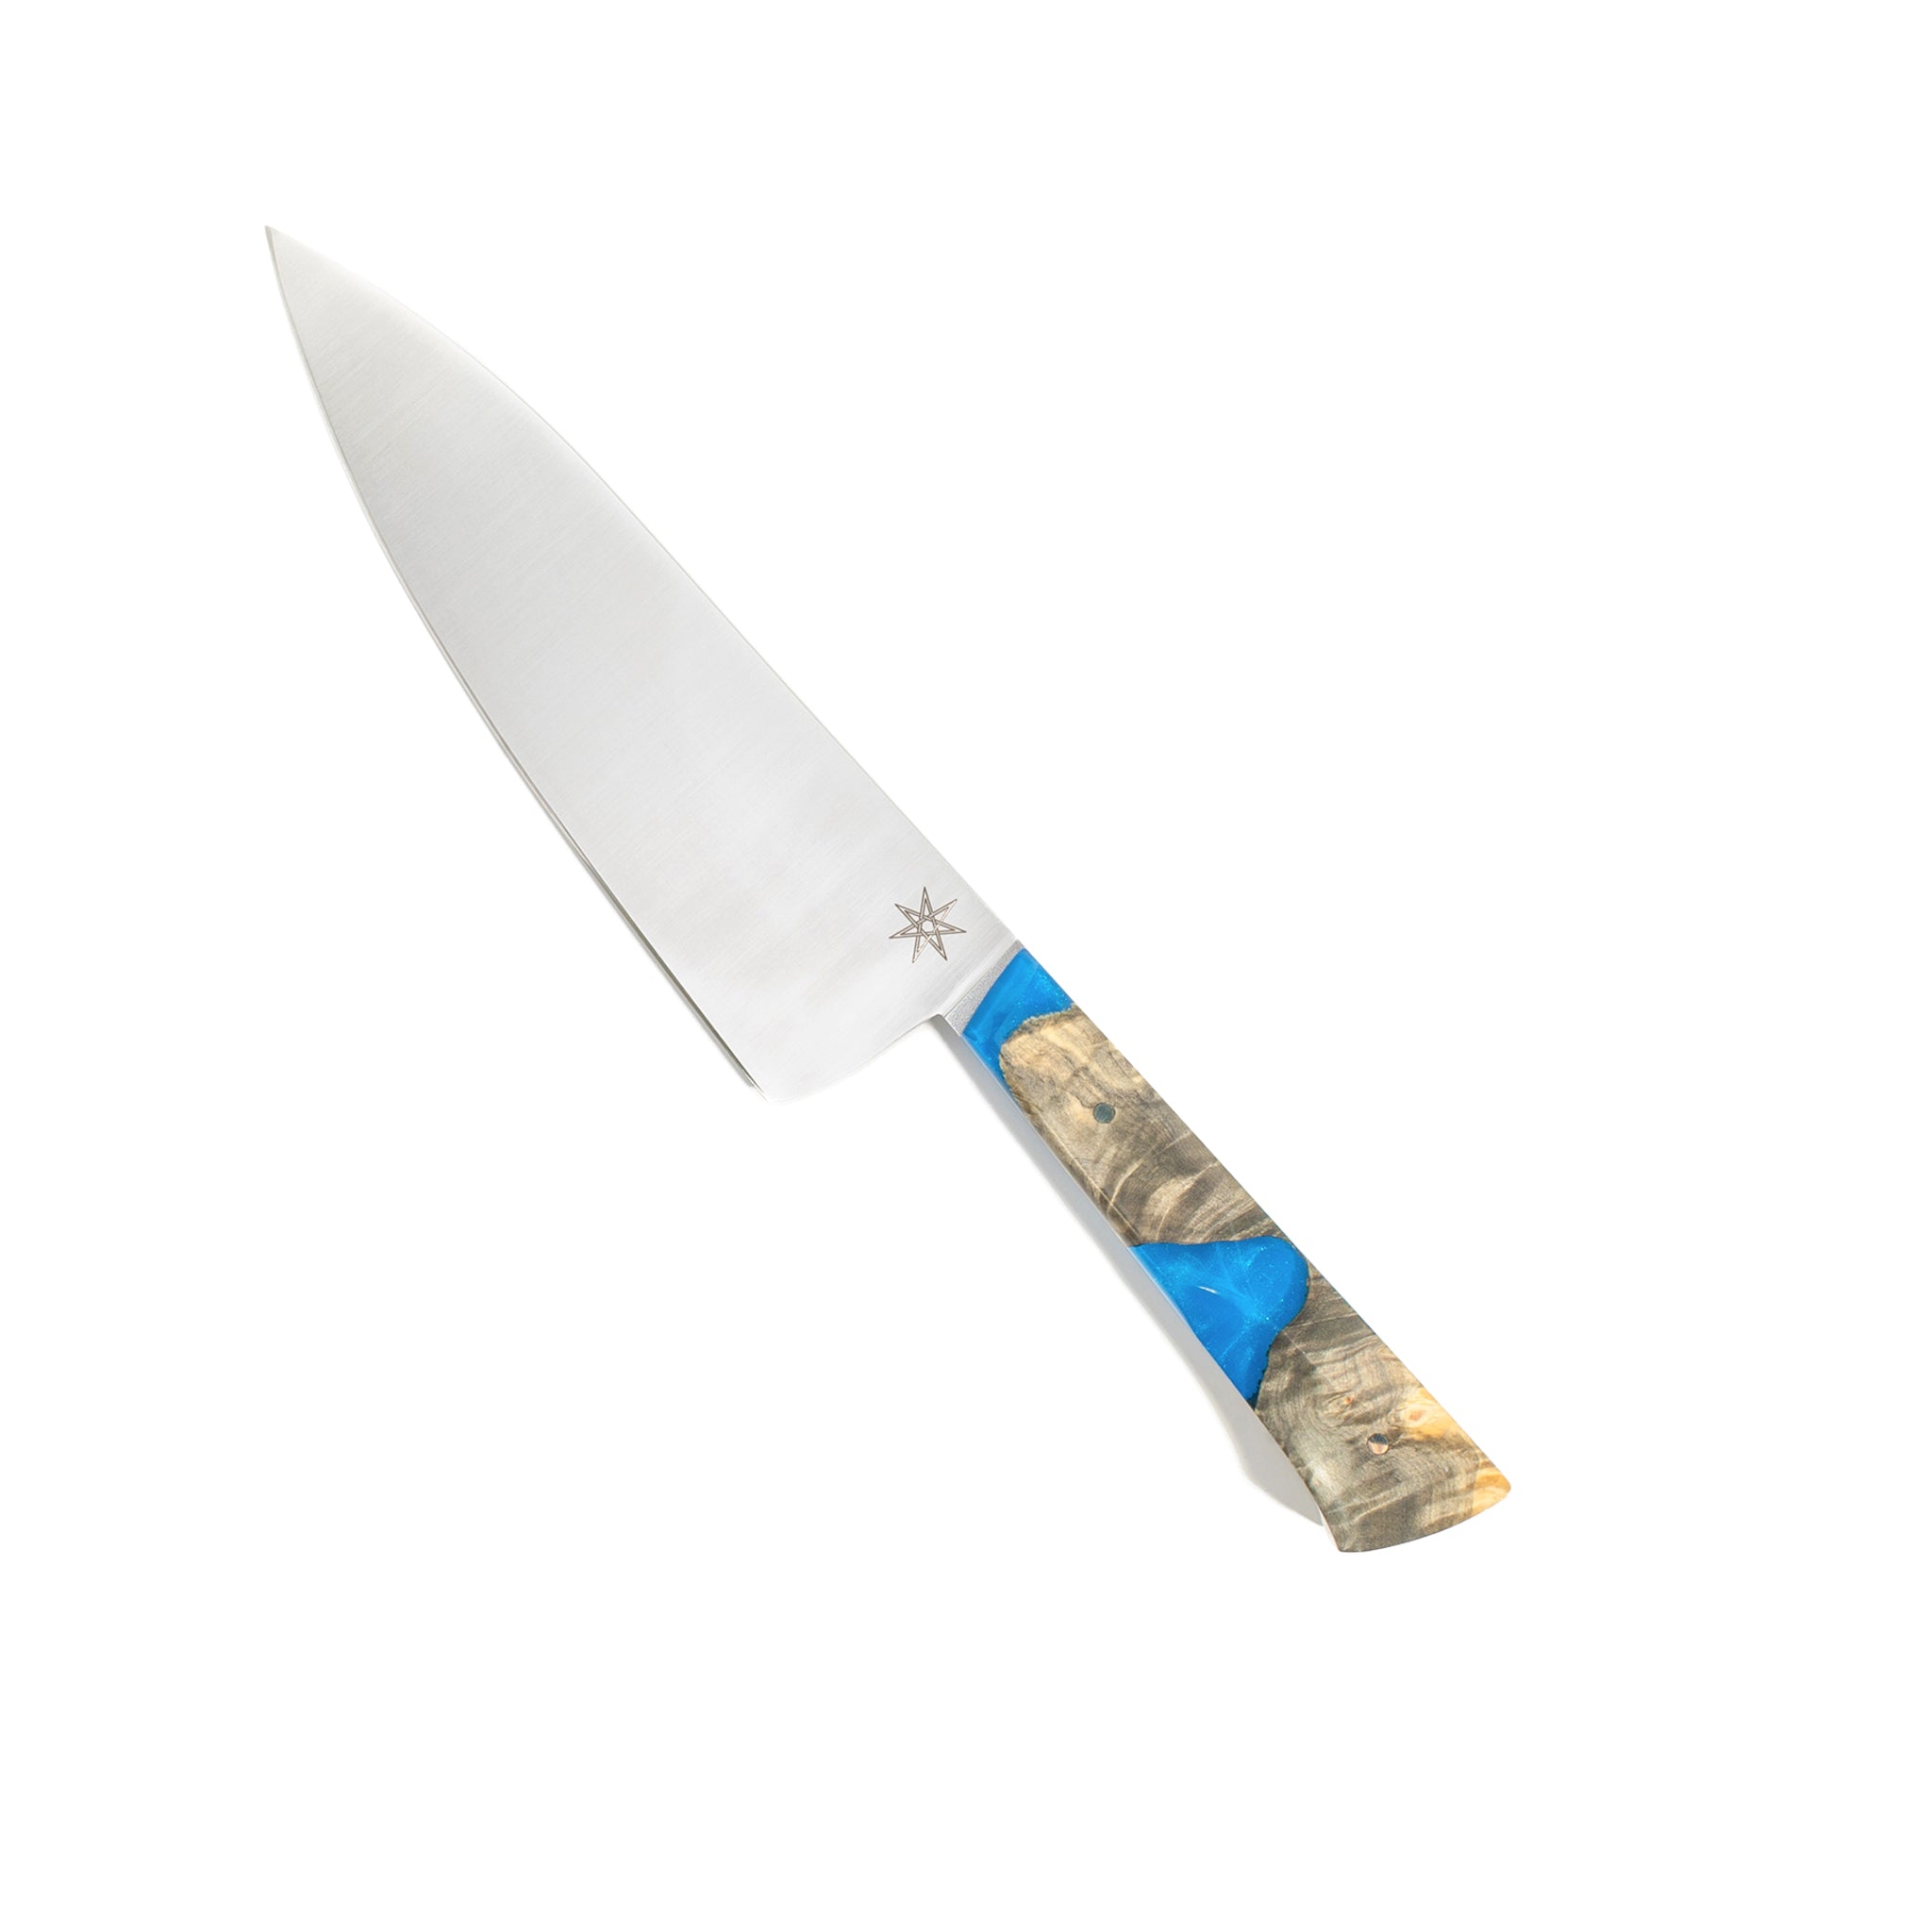 Town Cutler Tahoe Bliss 7" Chef Knife. Stainless steel blade with blue and buckeye burl handle.